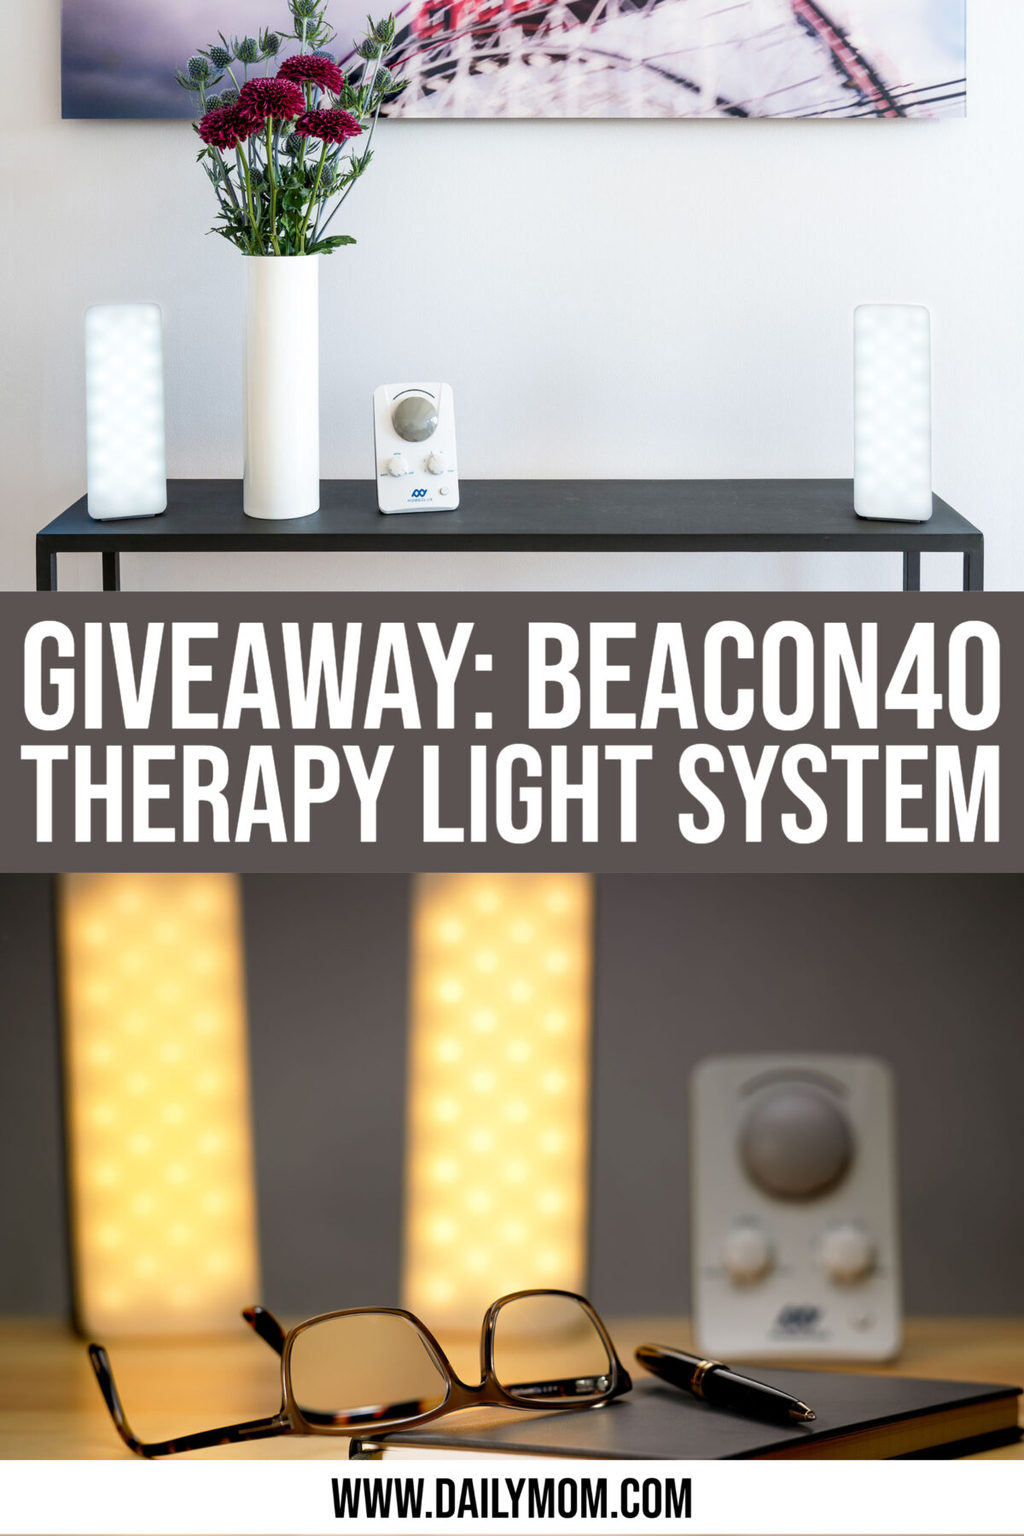 Beacon40 Personal Therapy Lights Giveaway